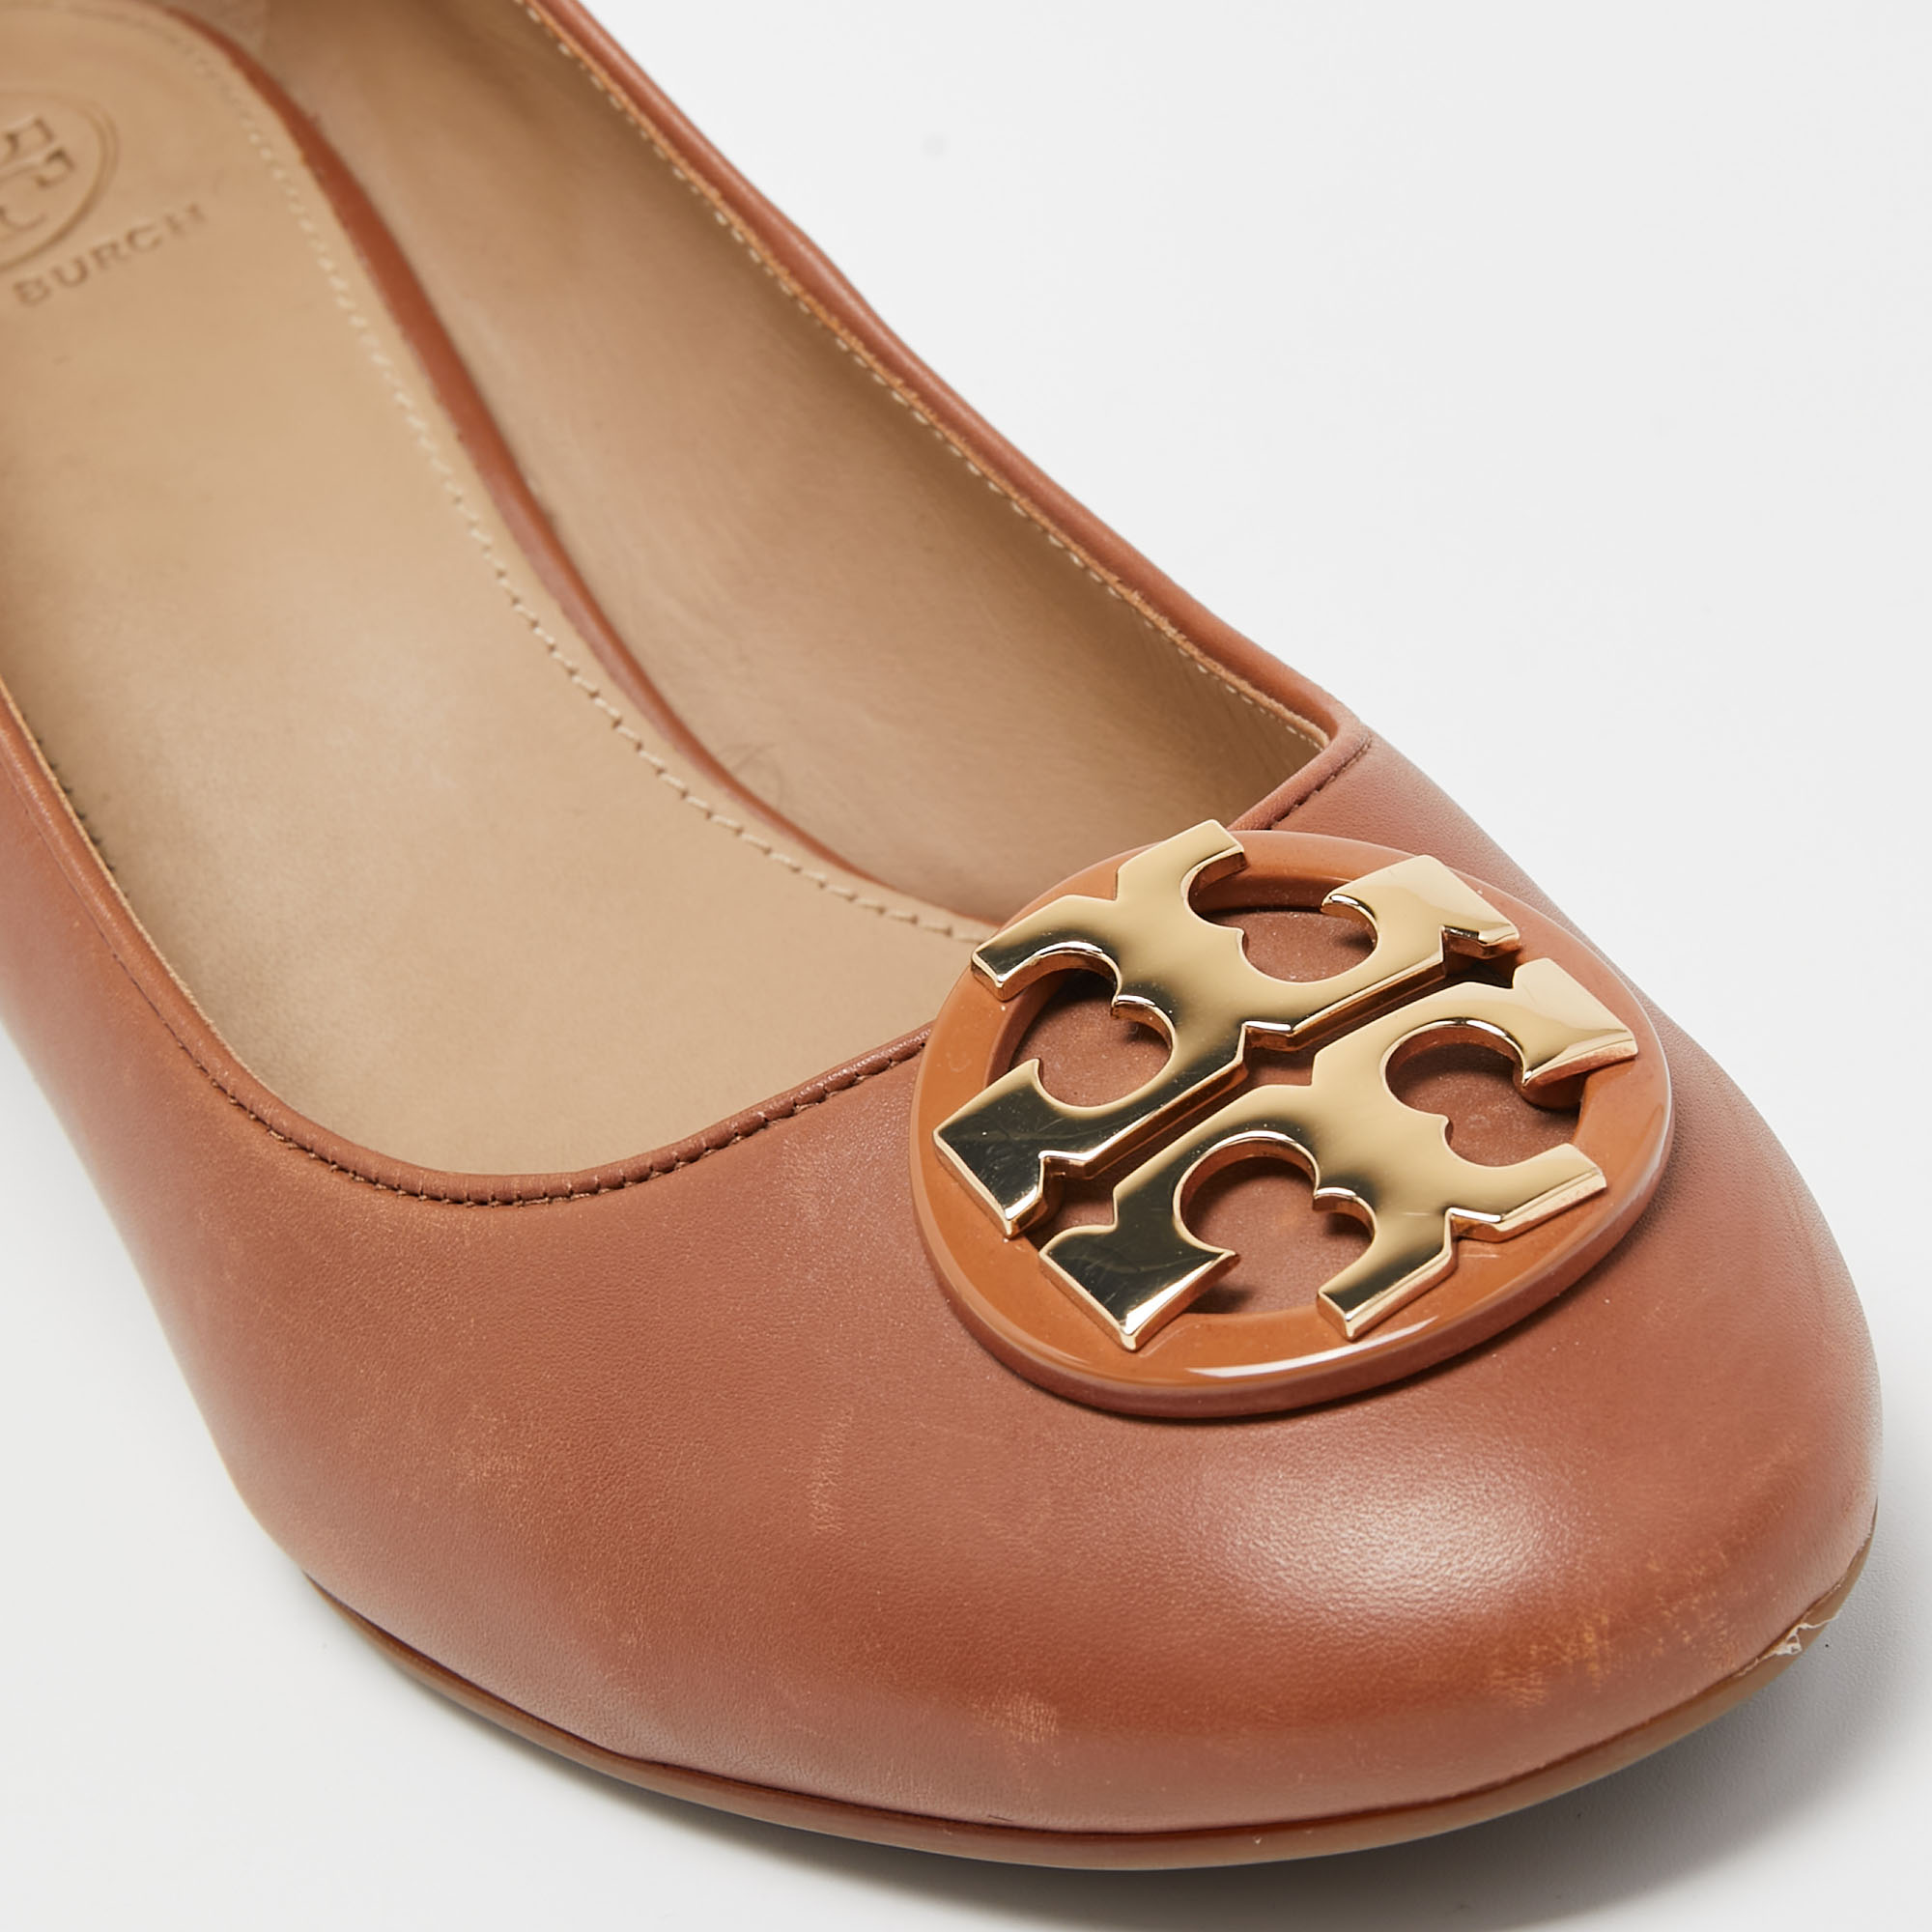 Tory Burch Brown Leather Janey Buckle Detail Block Heel Pumps Size 39